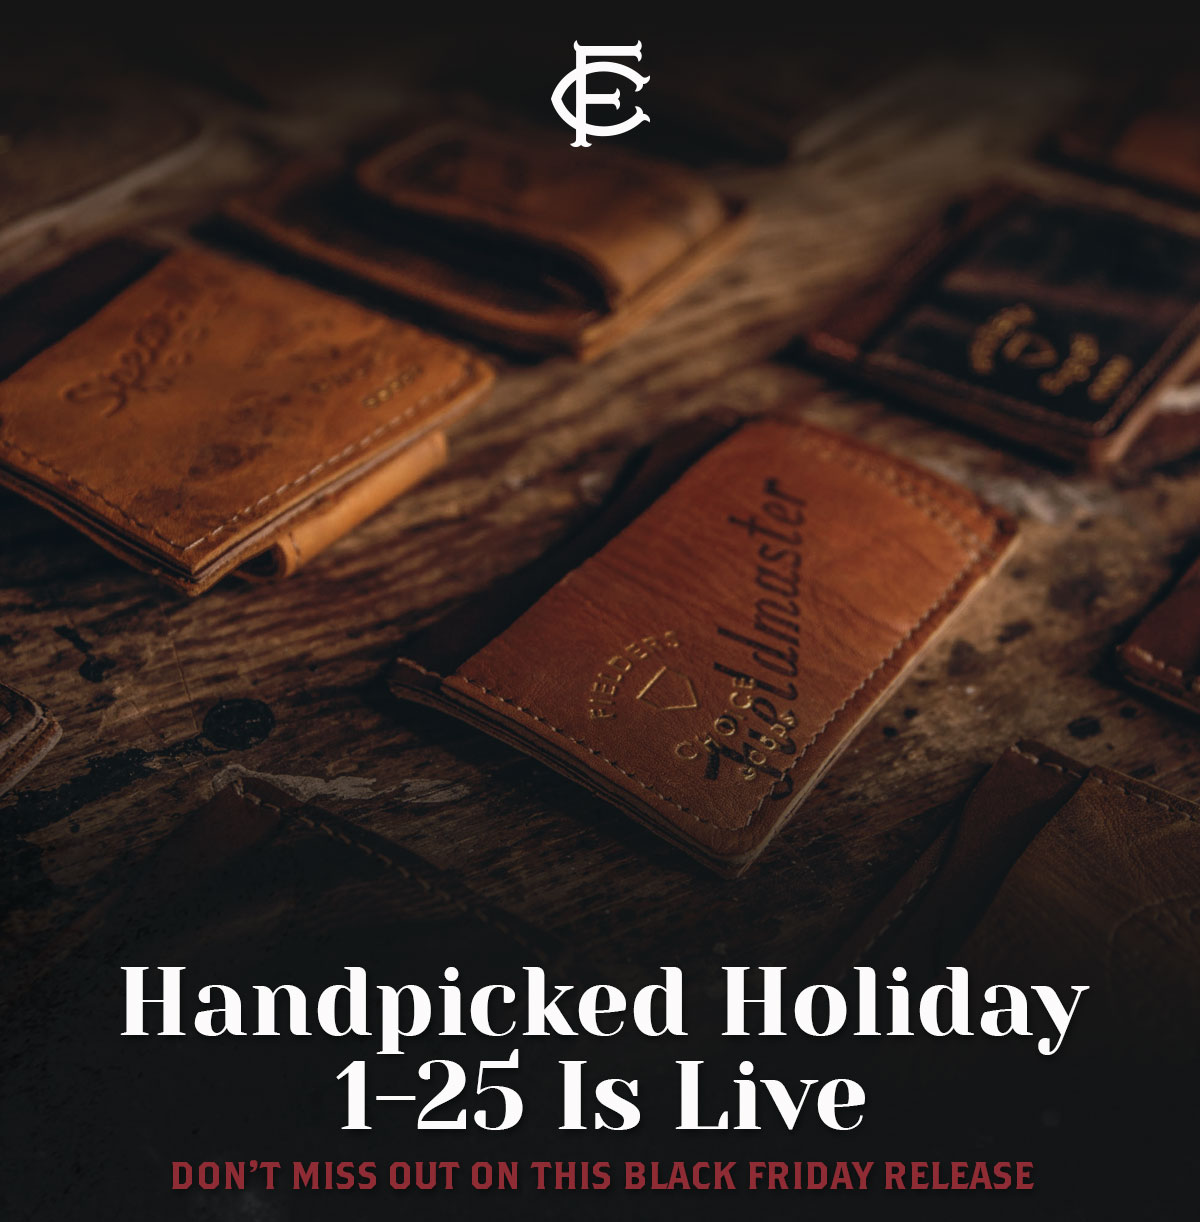 Handpicked Holiday 1-25 Is Live